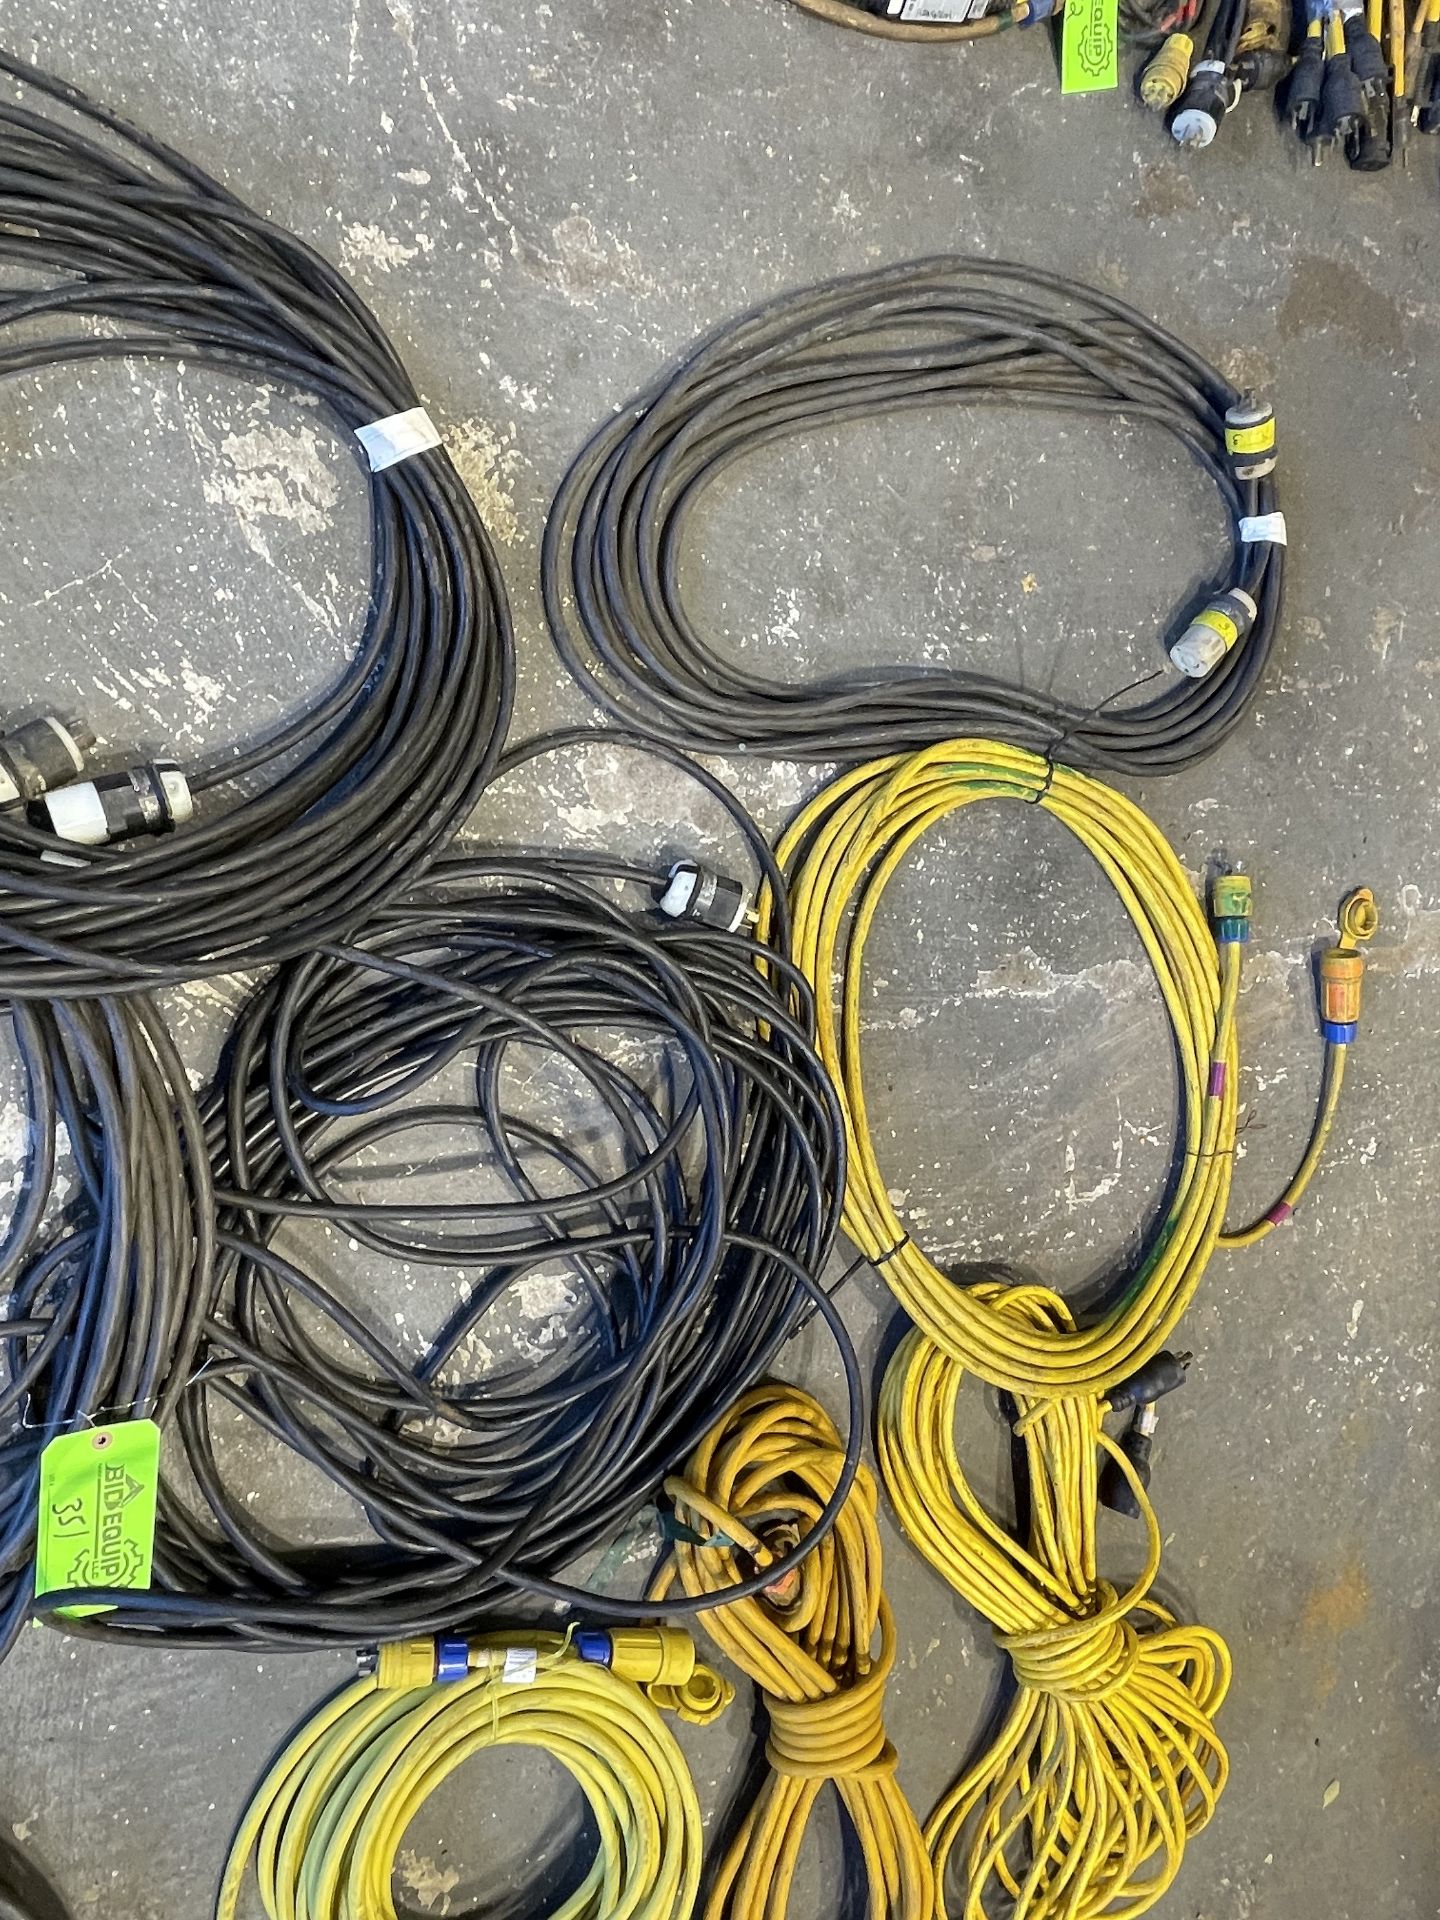 Lot of Extension Cords - Upland - Image 9 of 11